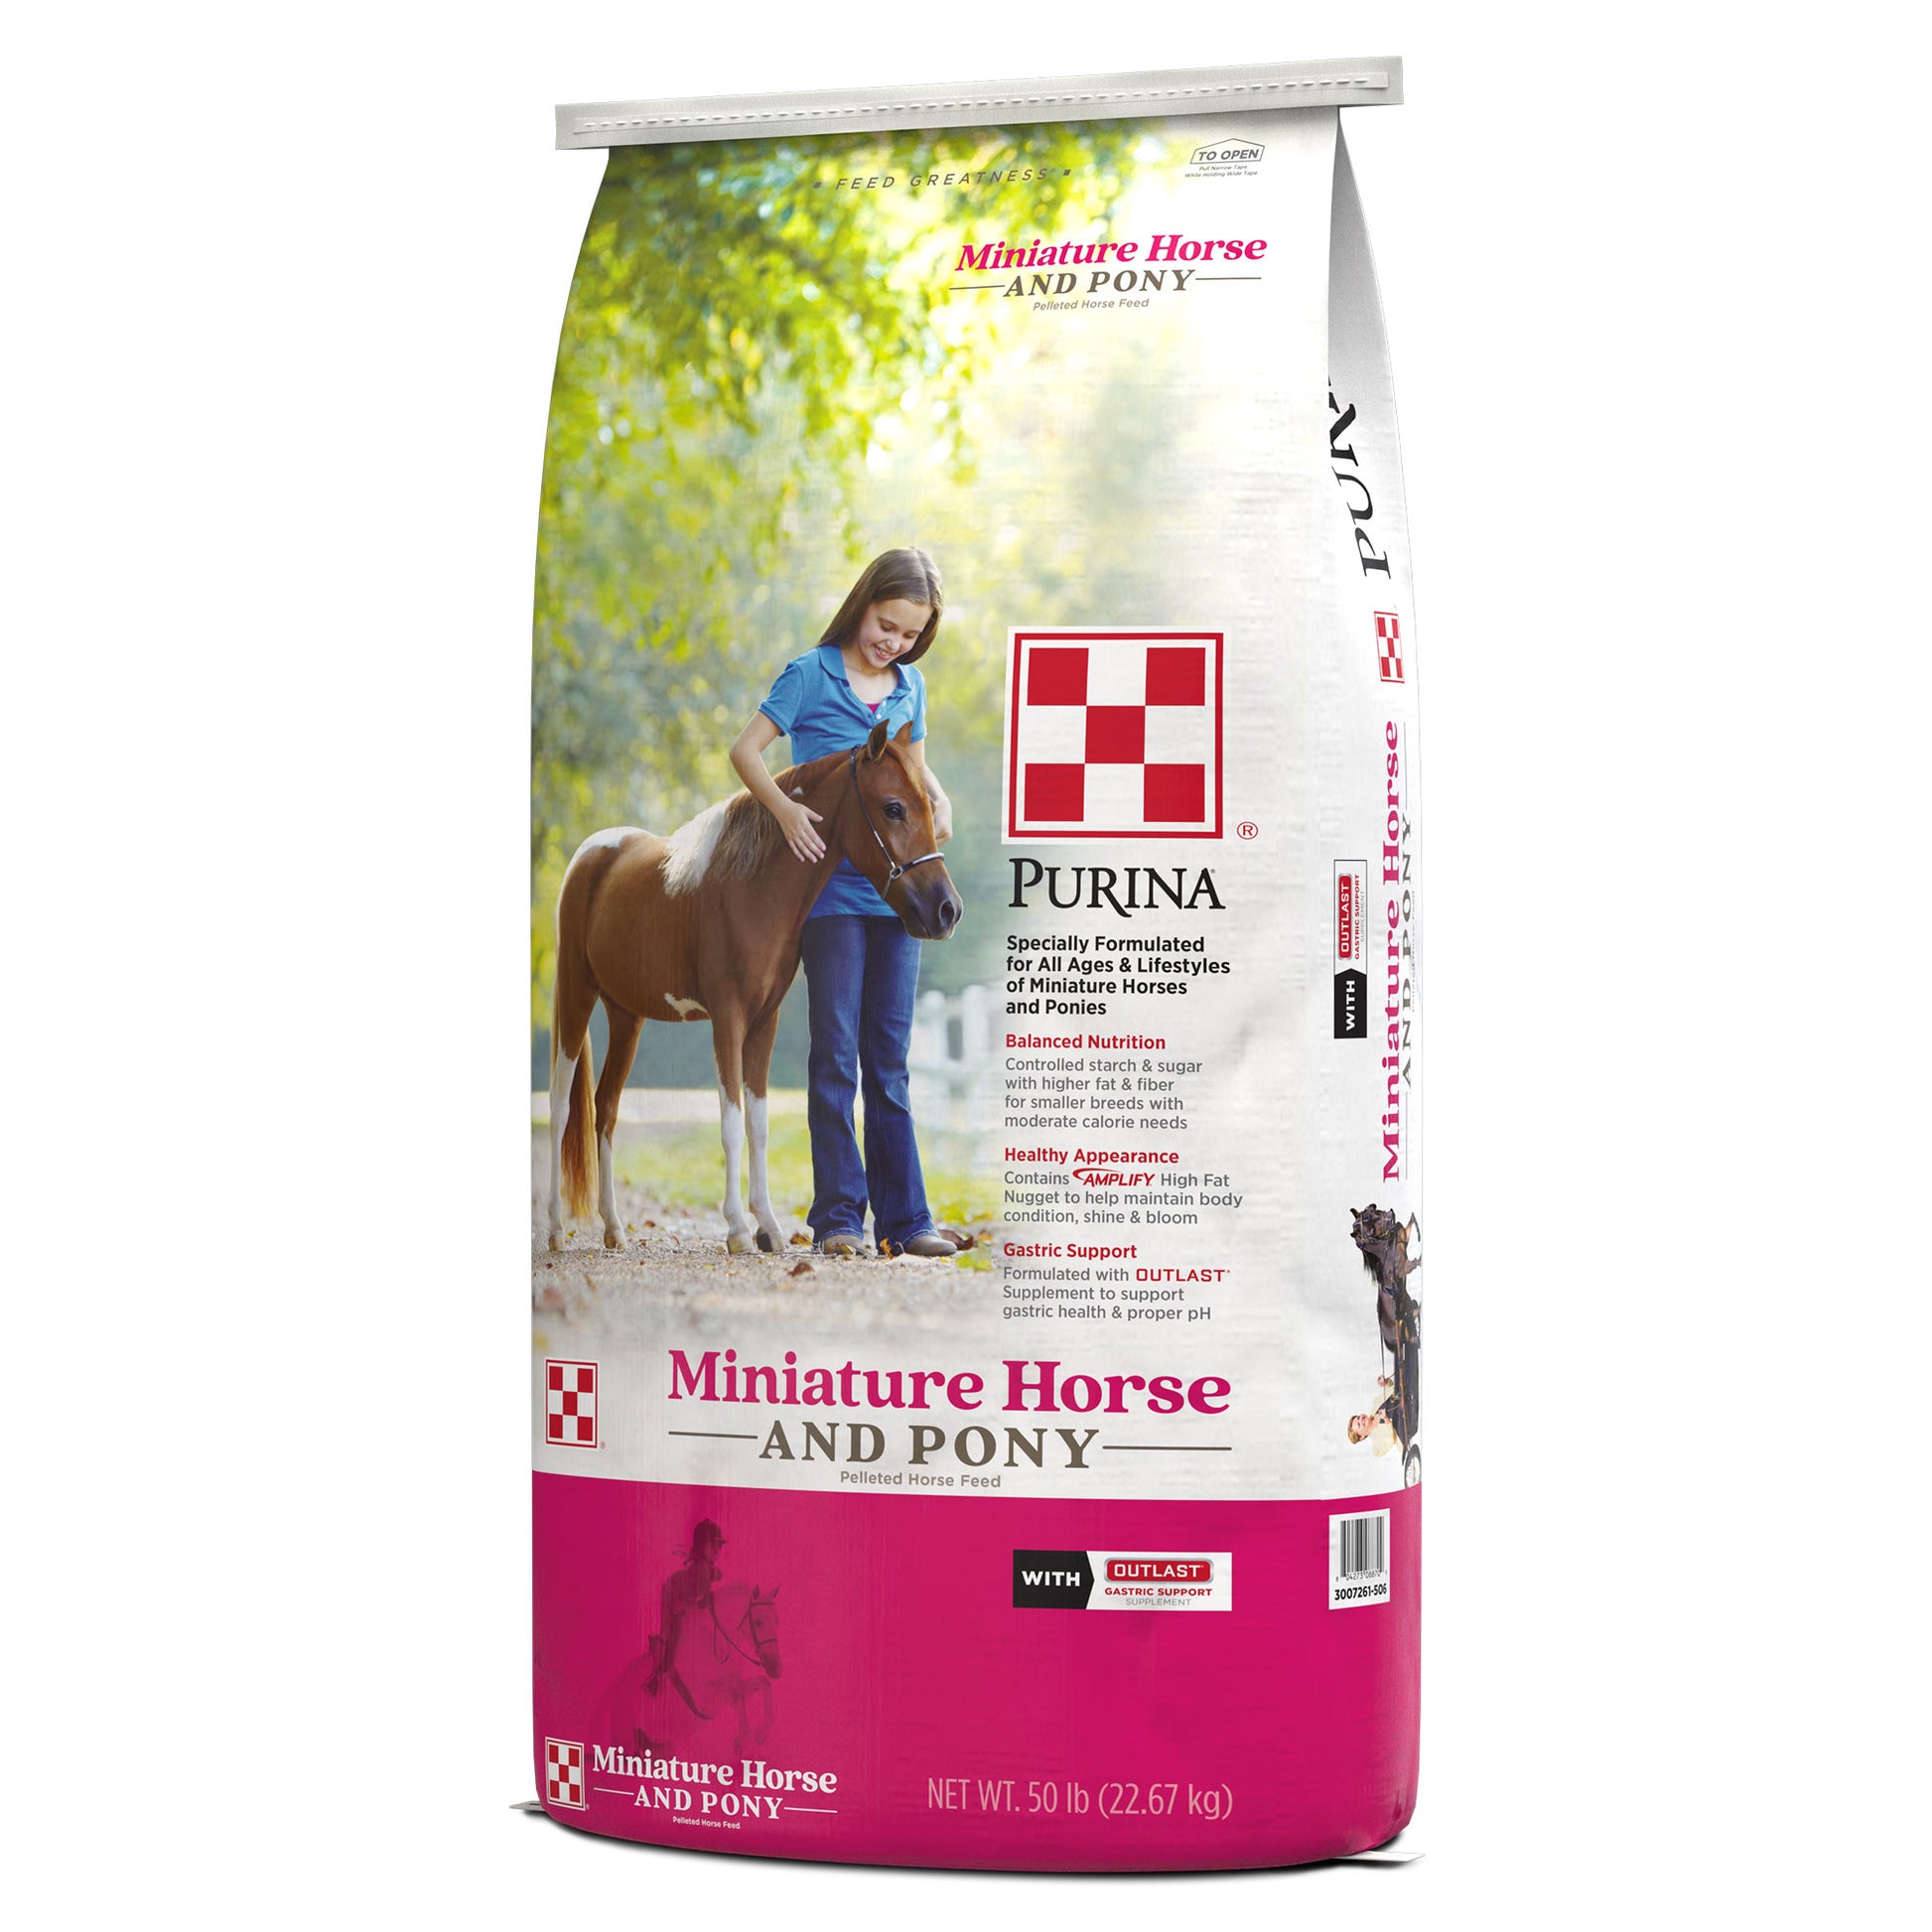 Miniature Horse & Pony Concentrate Feed Supplement